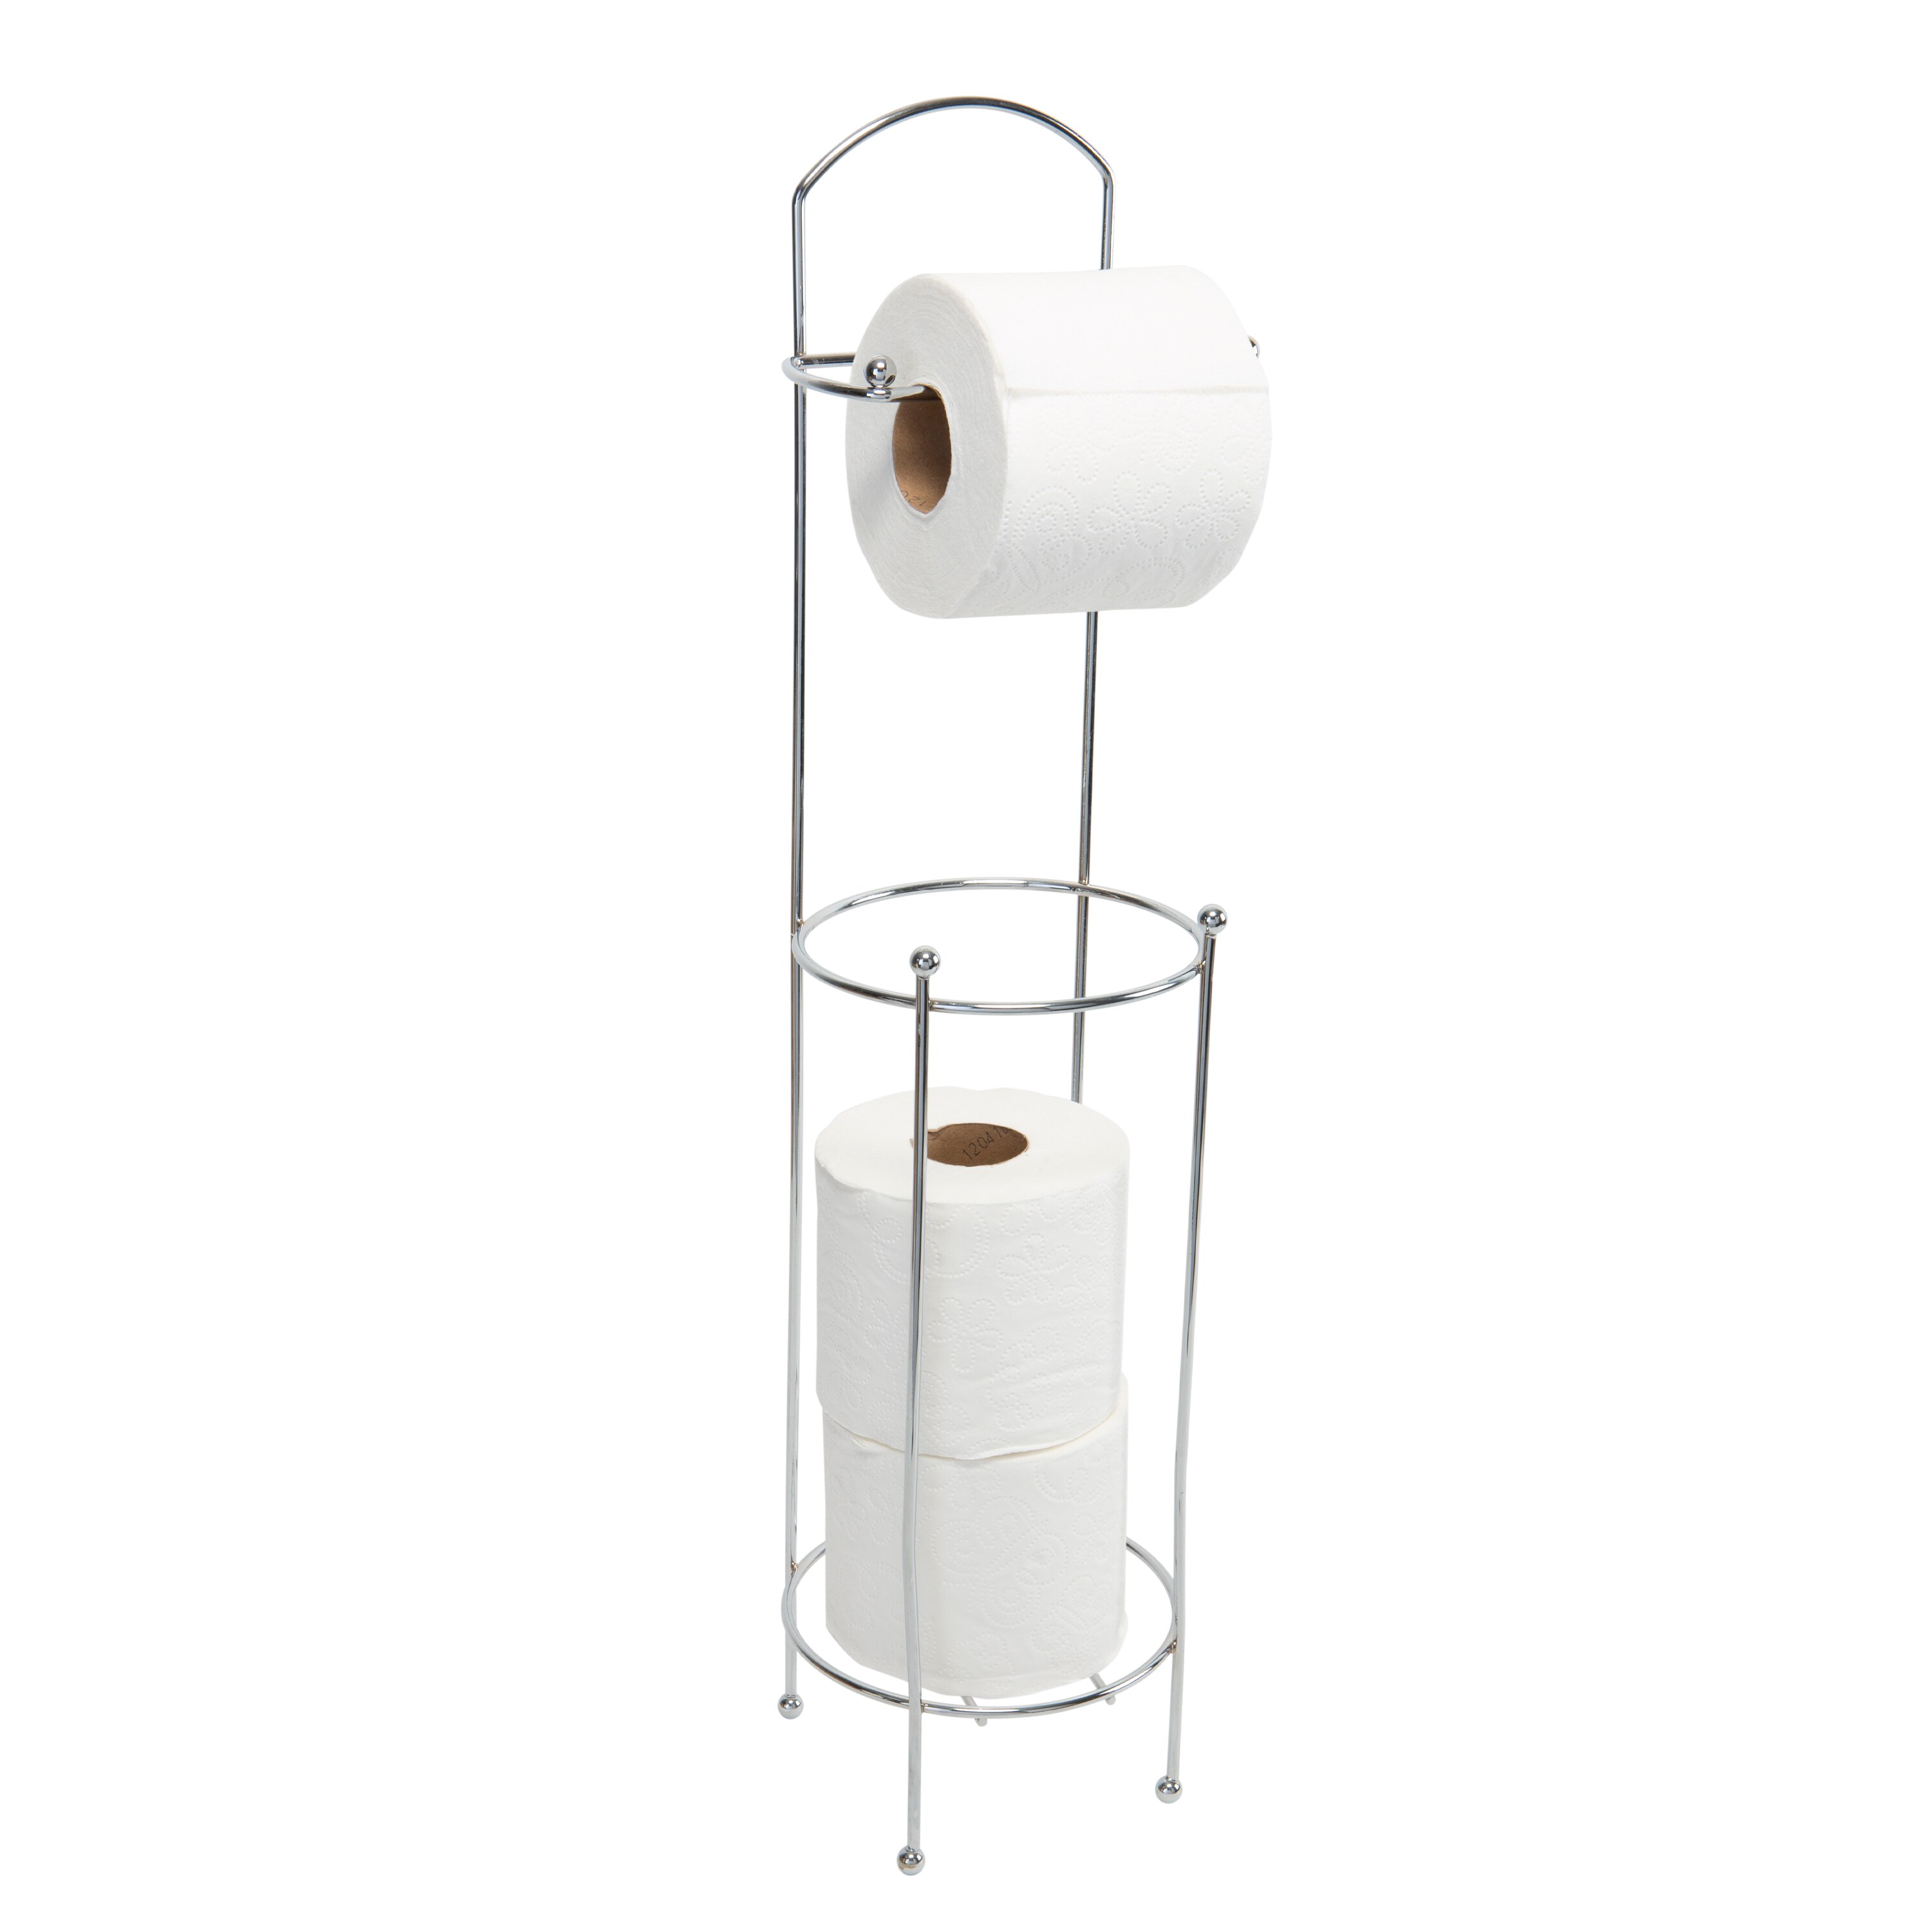 Home Traditions Z02230 Rustic Wall Mount Toilet Tissue Paper Roll Holder and Dispenser Basket for Bathroom Storage 